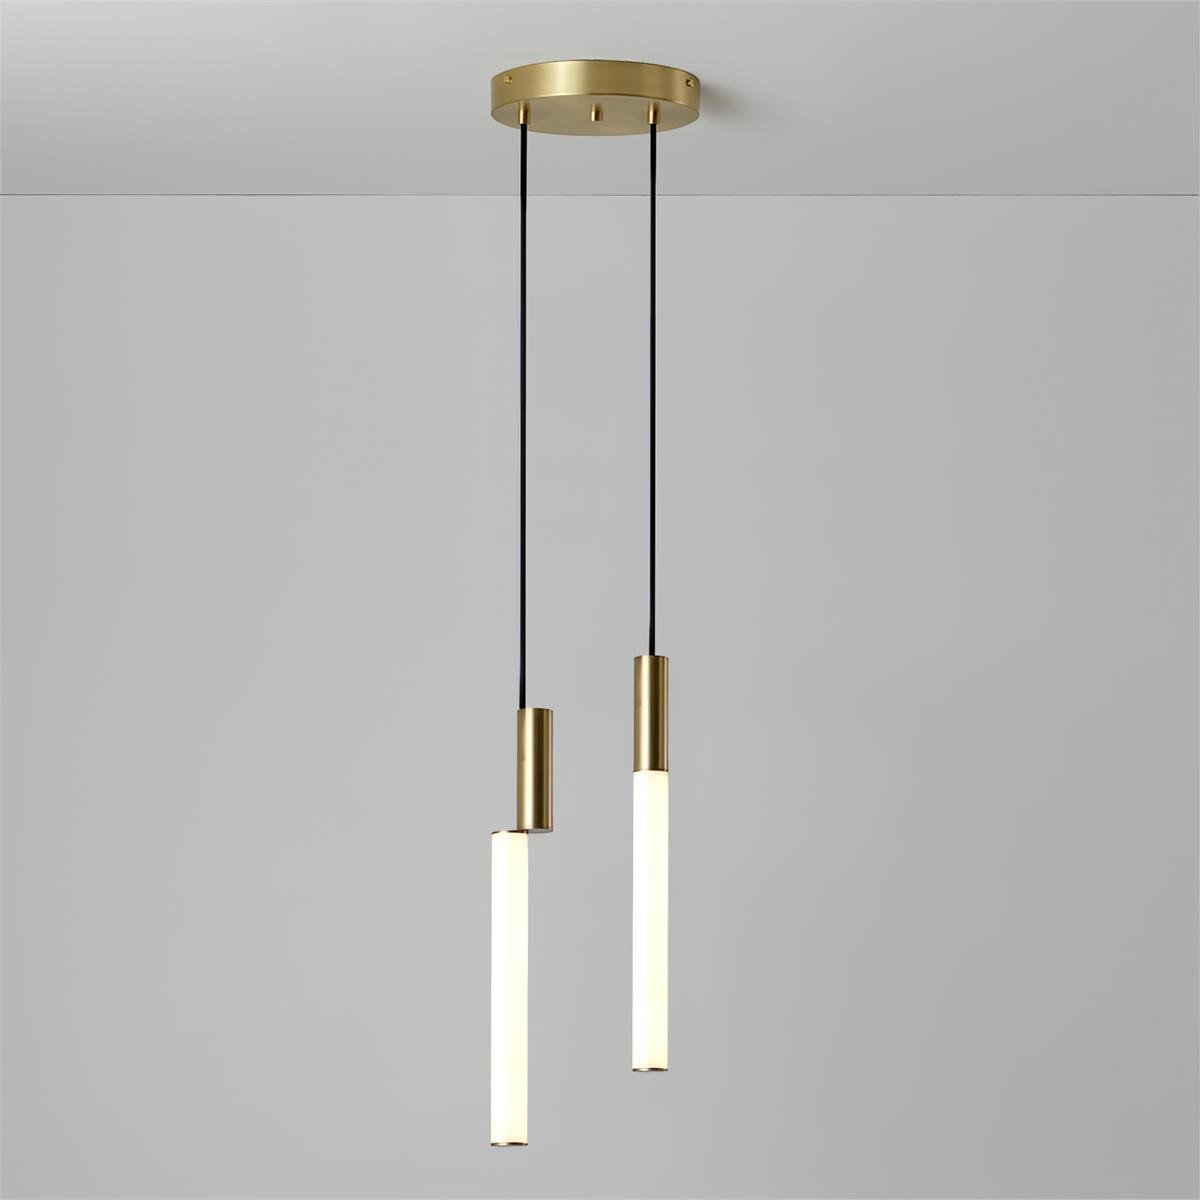 Gold and white Signal LED Pendant Light with 2 heads, measuring 5.9" in diameter and 59" in height (15cm x 150cm), emitting a cool light.